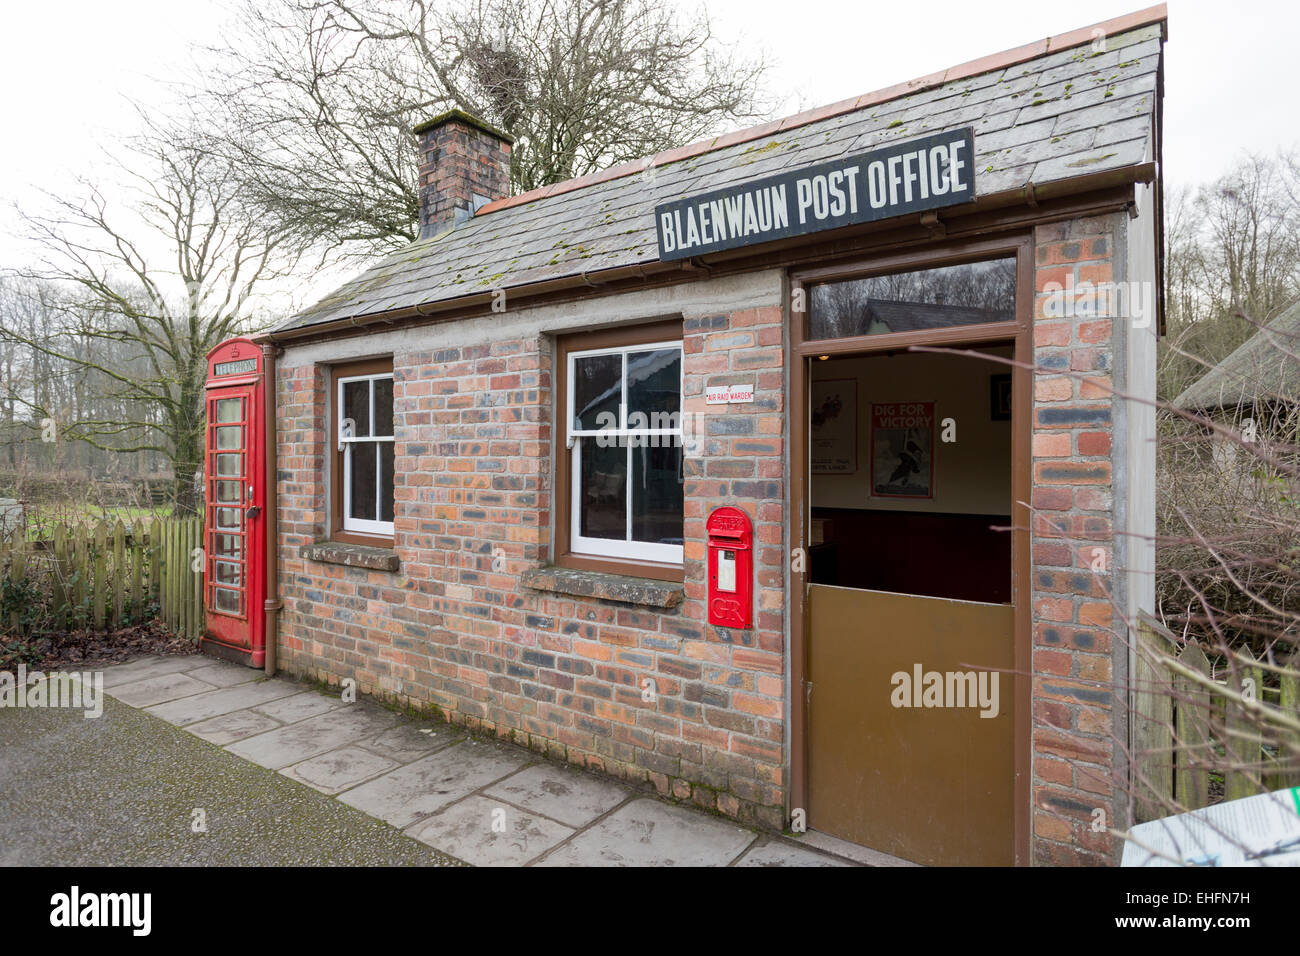 Post Office, originally from Blaen-waun, Camarthanshire. Now seen at St Fagans National Museum, Cardiff, Wales,UK Stock Photo